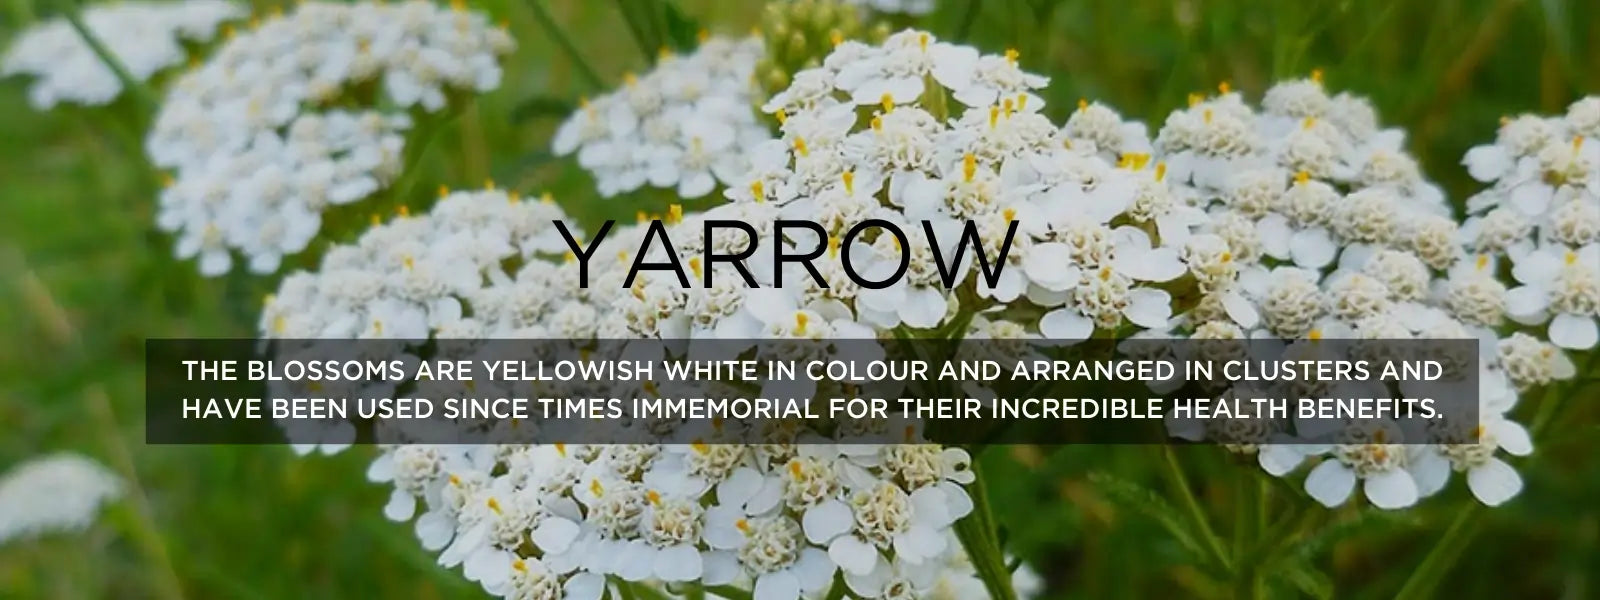 Yarrow - Health Benefits, Uses and Important Facts